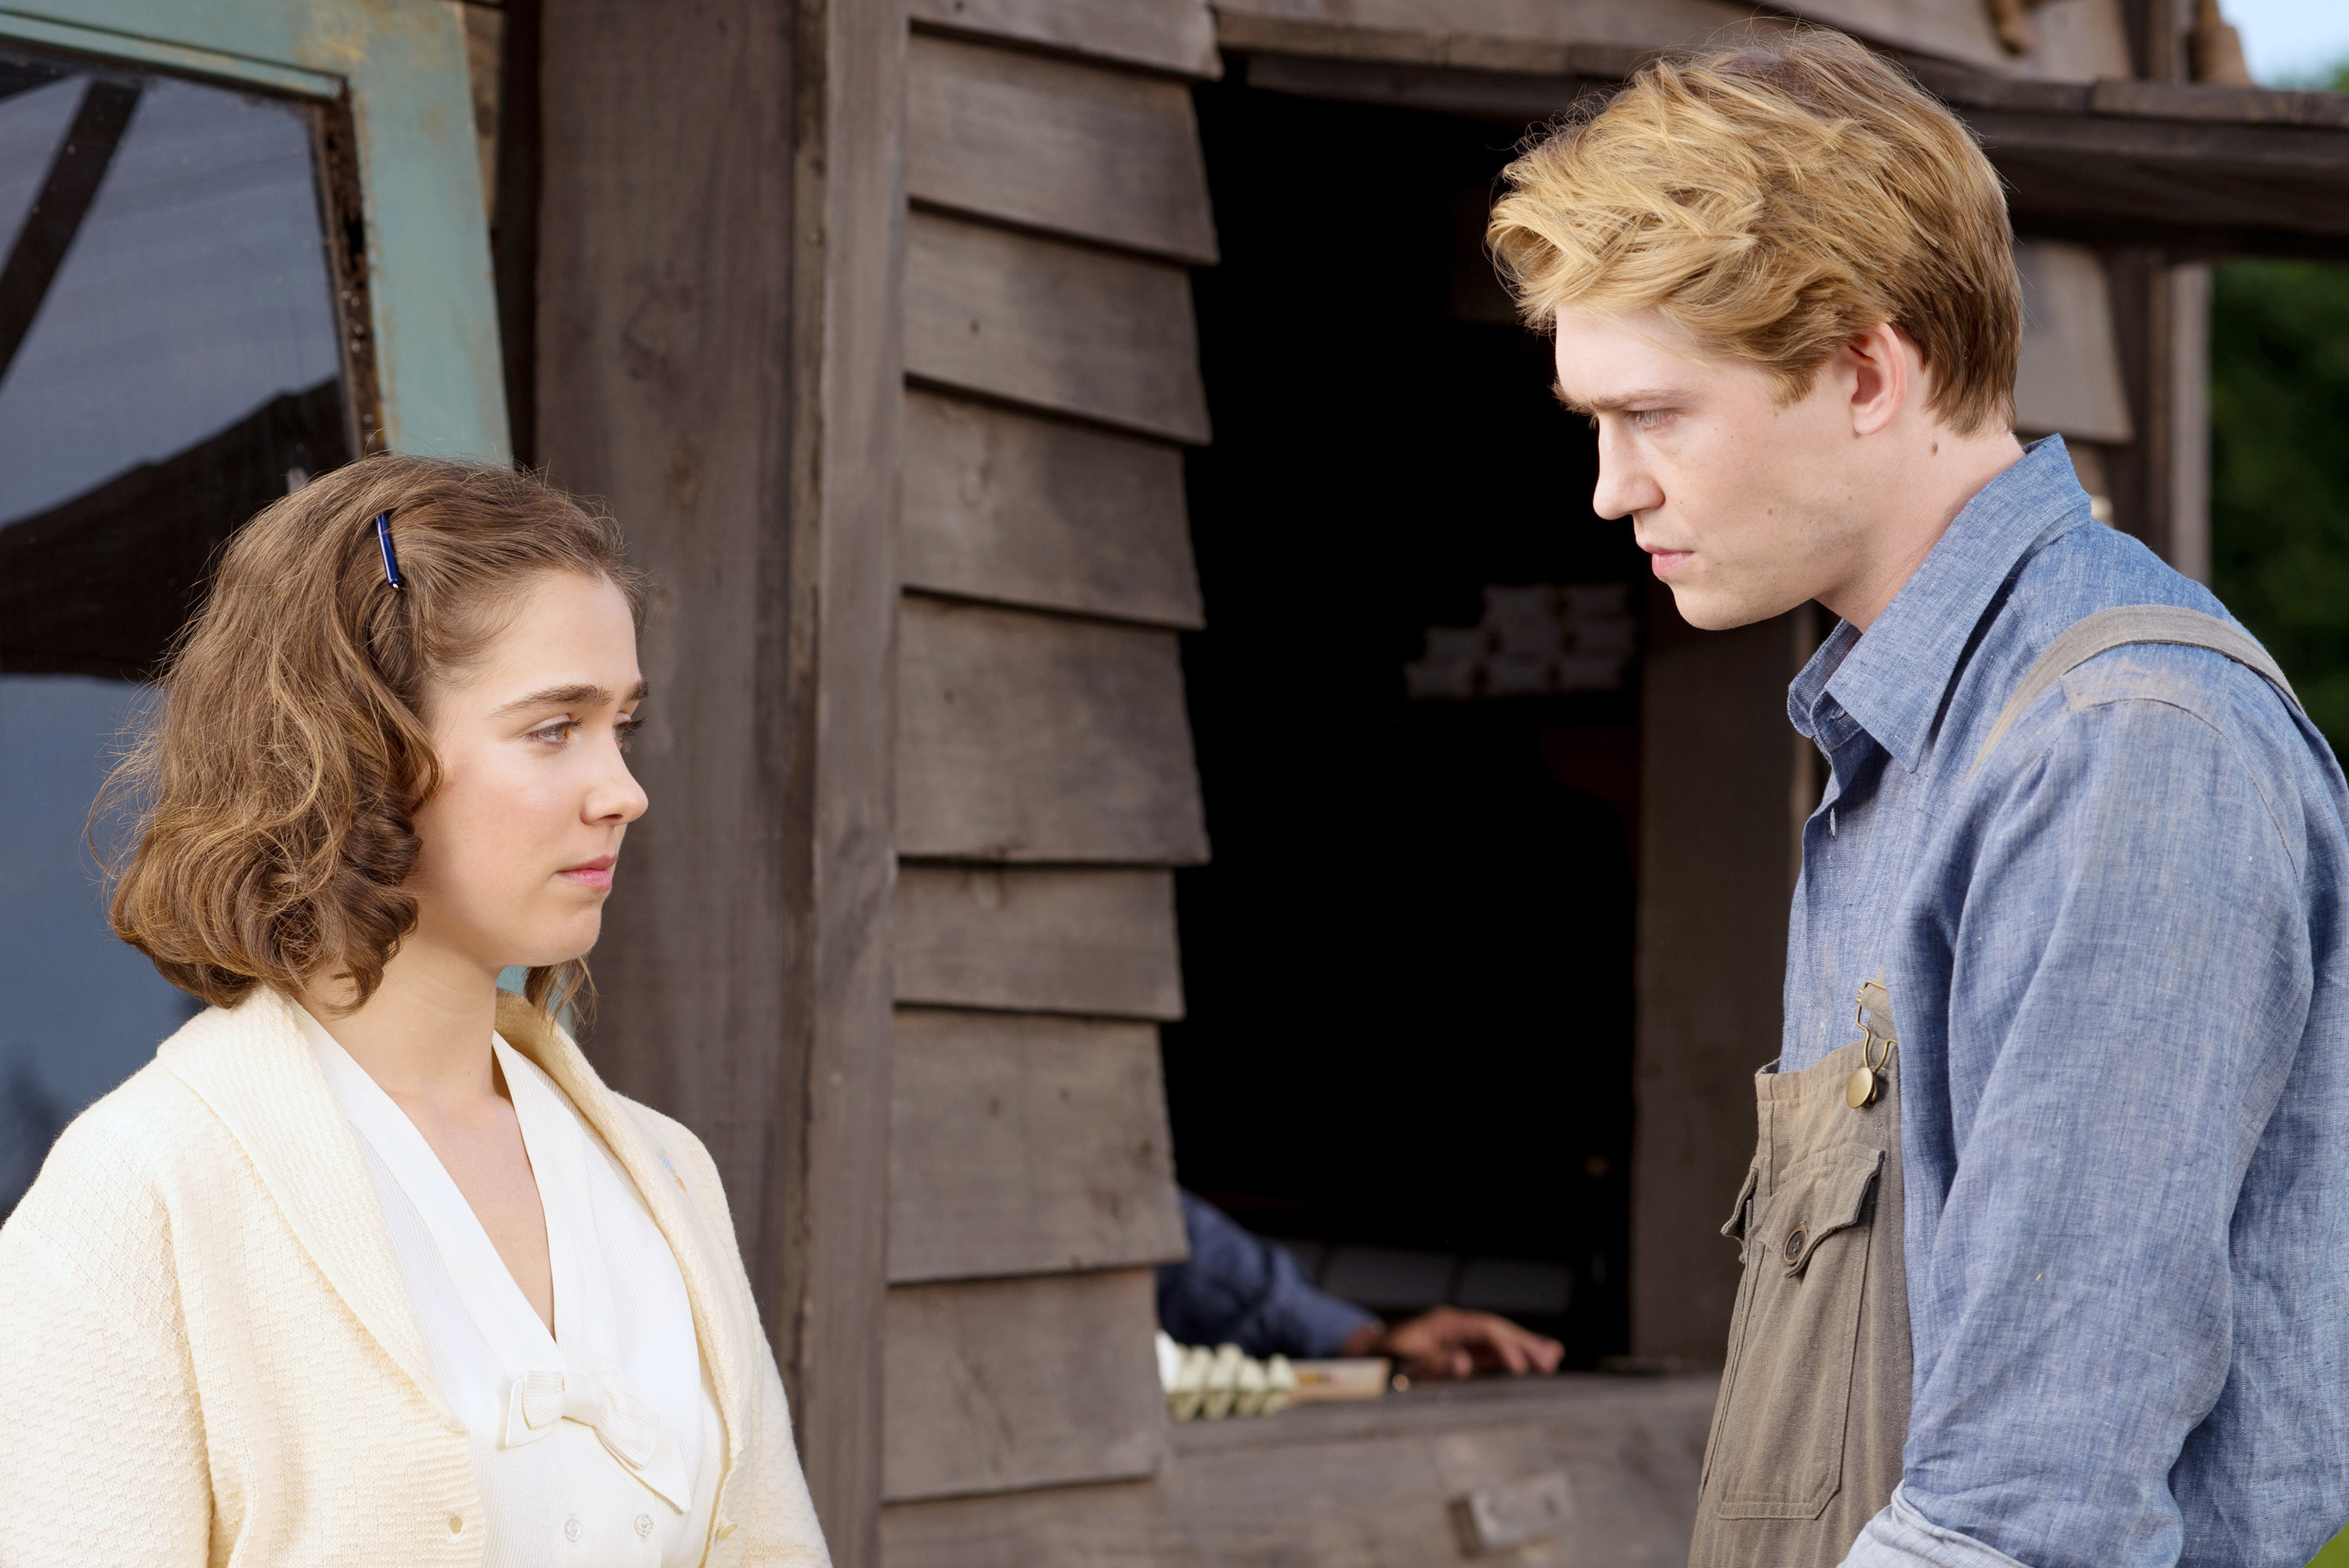 Joe Alwyn and Haley Lu Richardson stand outside, looking seriously at each other